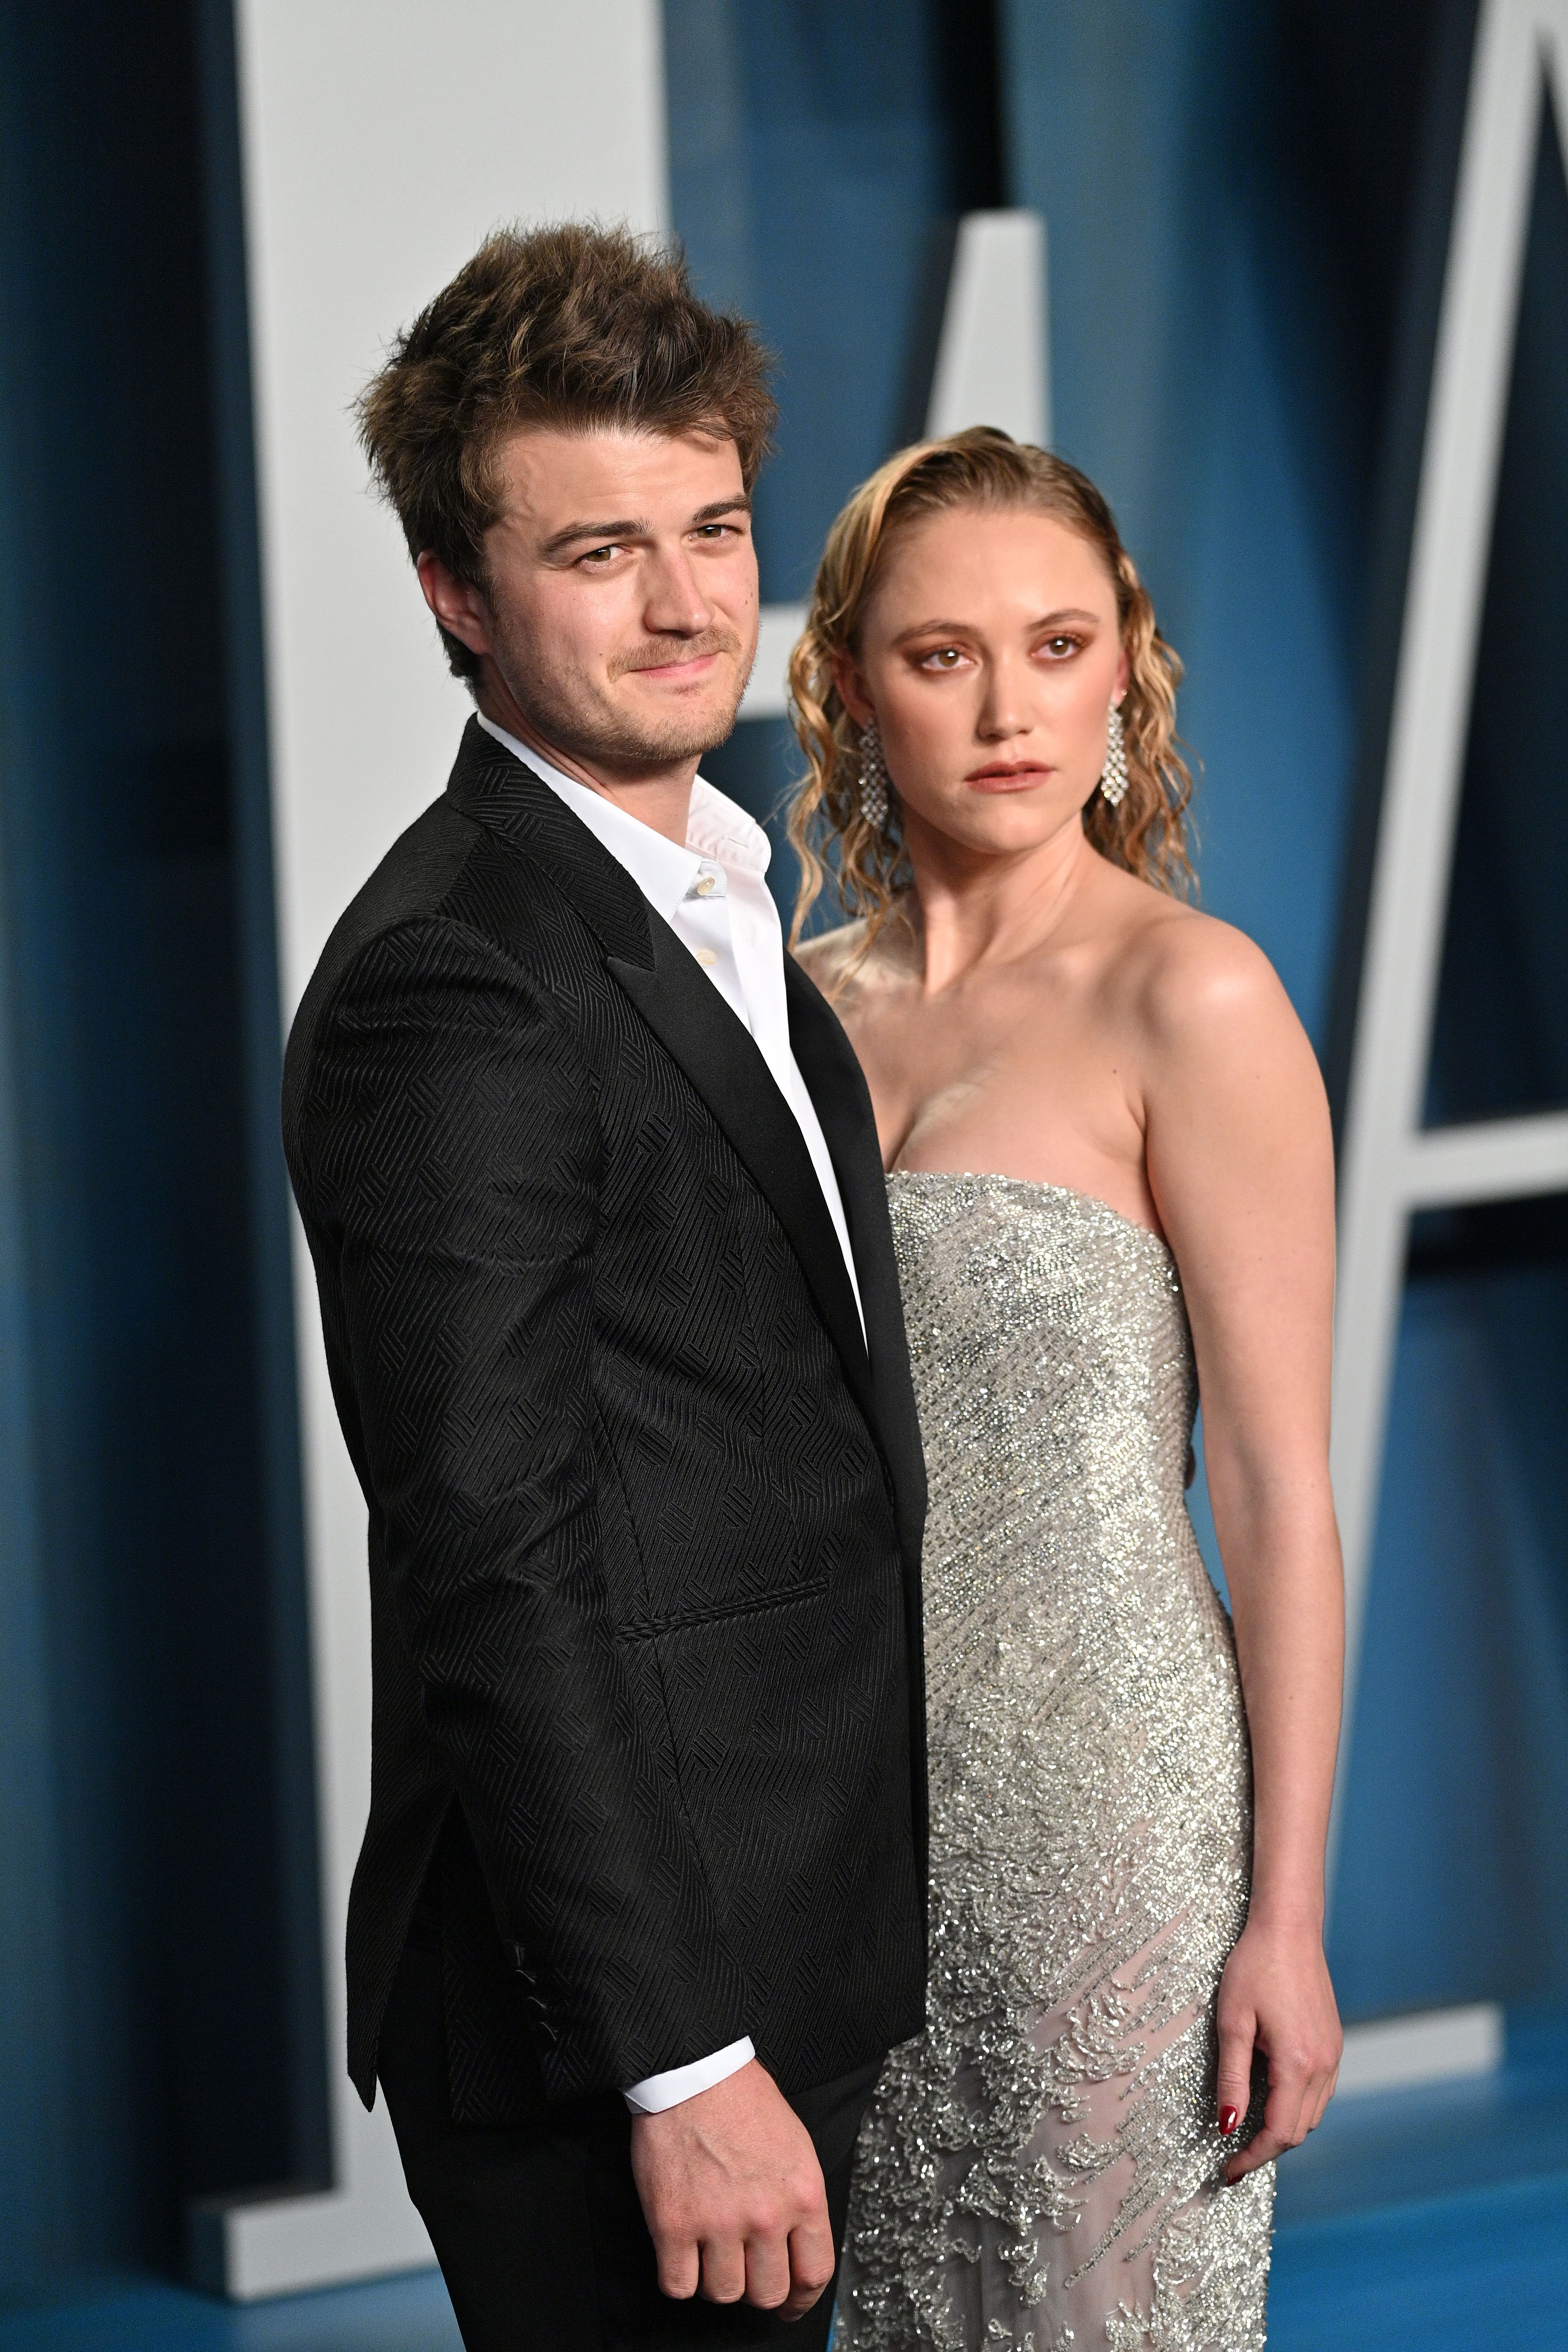 Joe Keery and Maika Monroe attend the 2022 Vanity Fair Oscar Party on March 27, 2022, in Beverly Hills, California. | Source: Getty Images